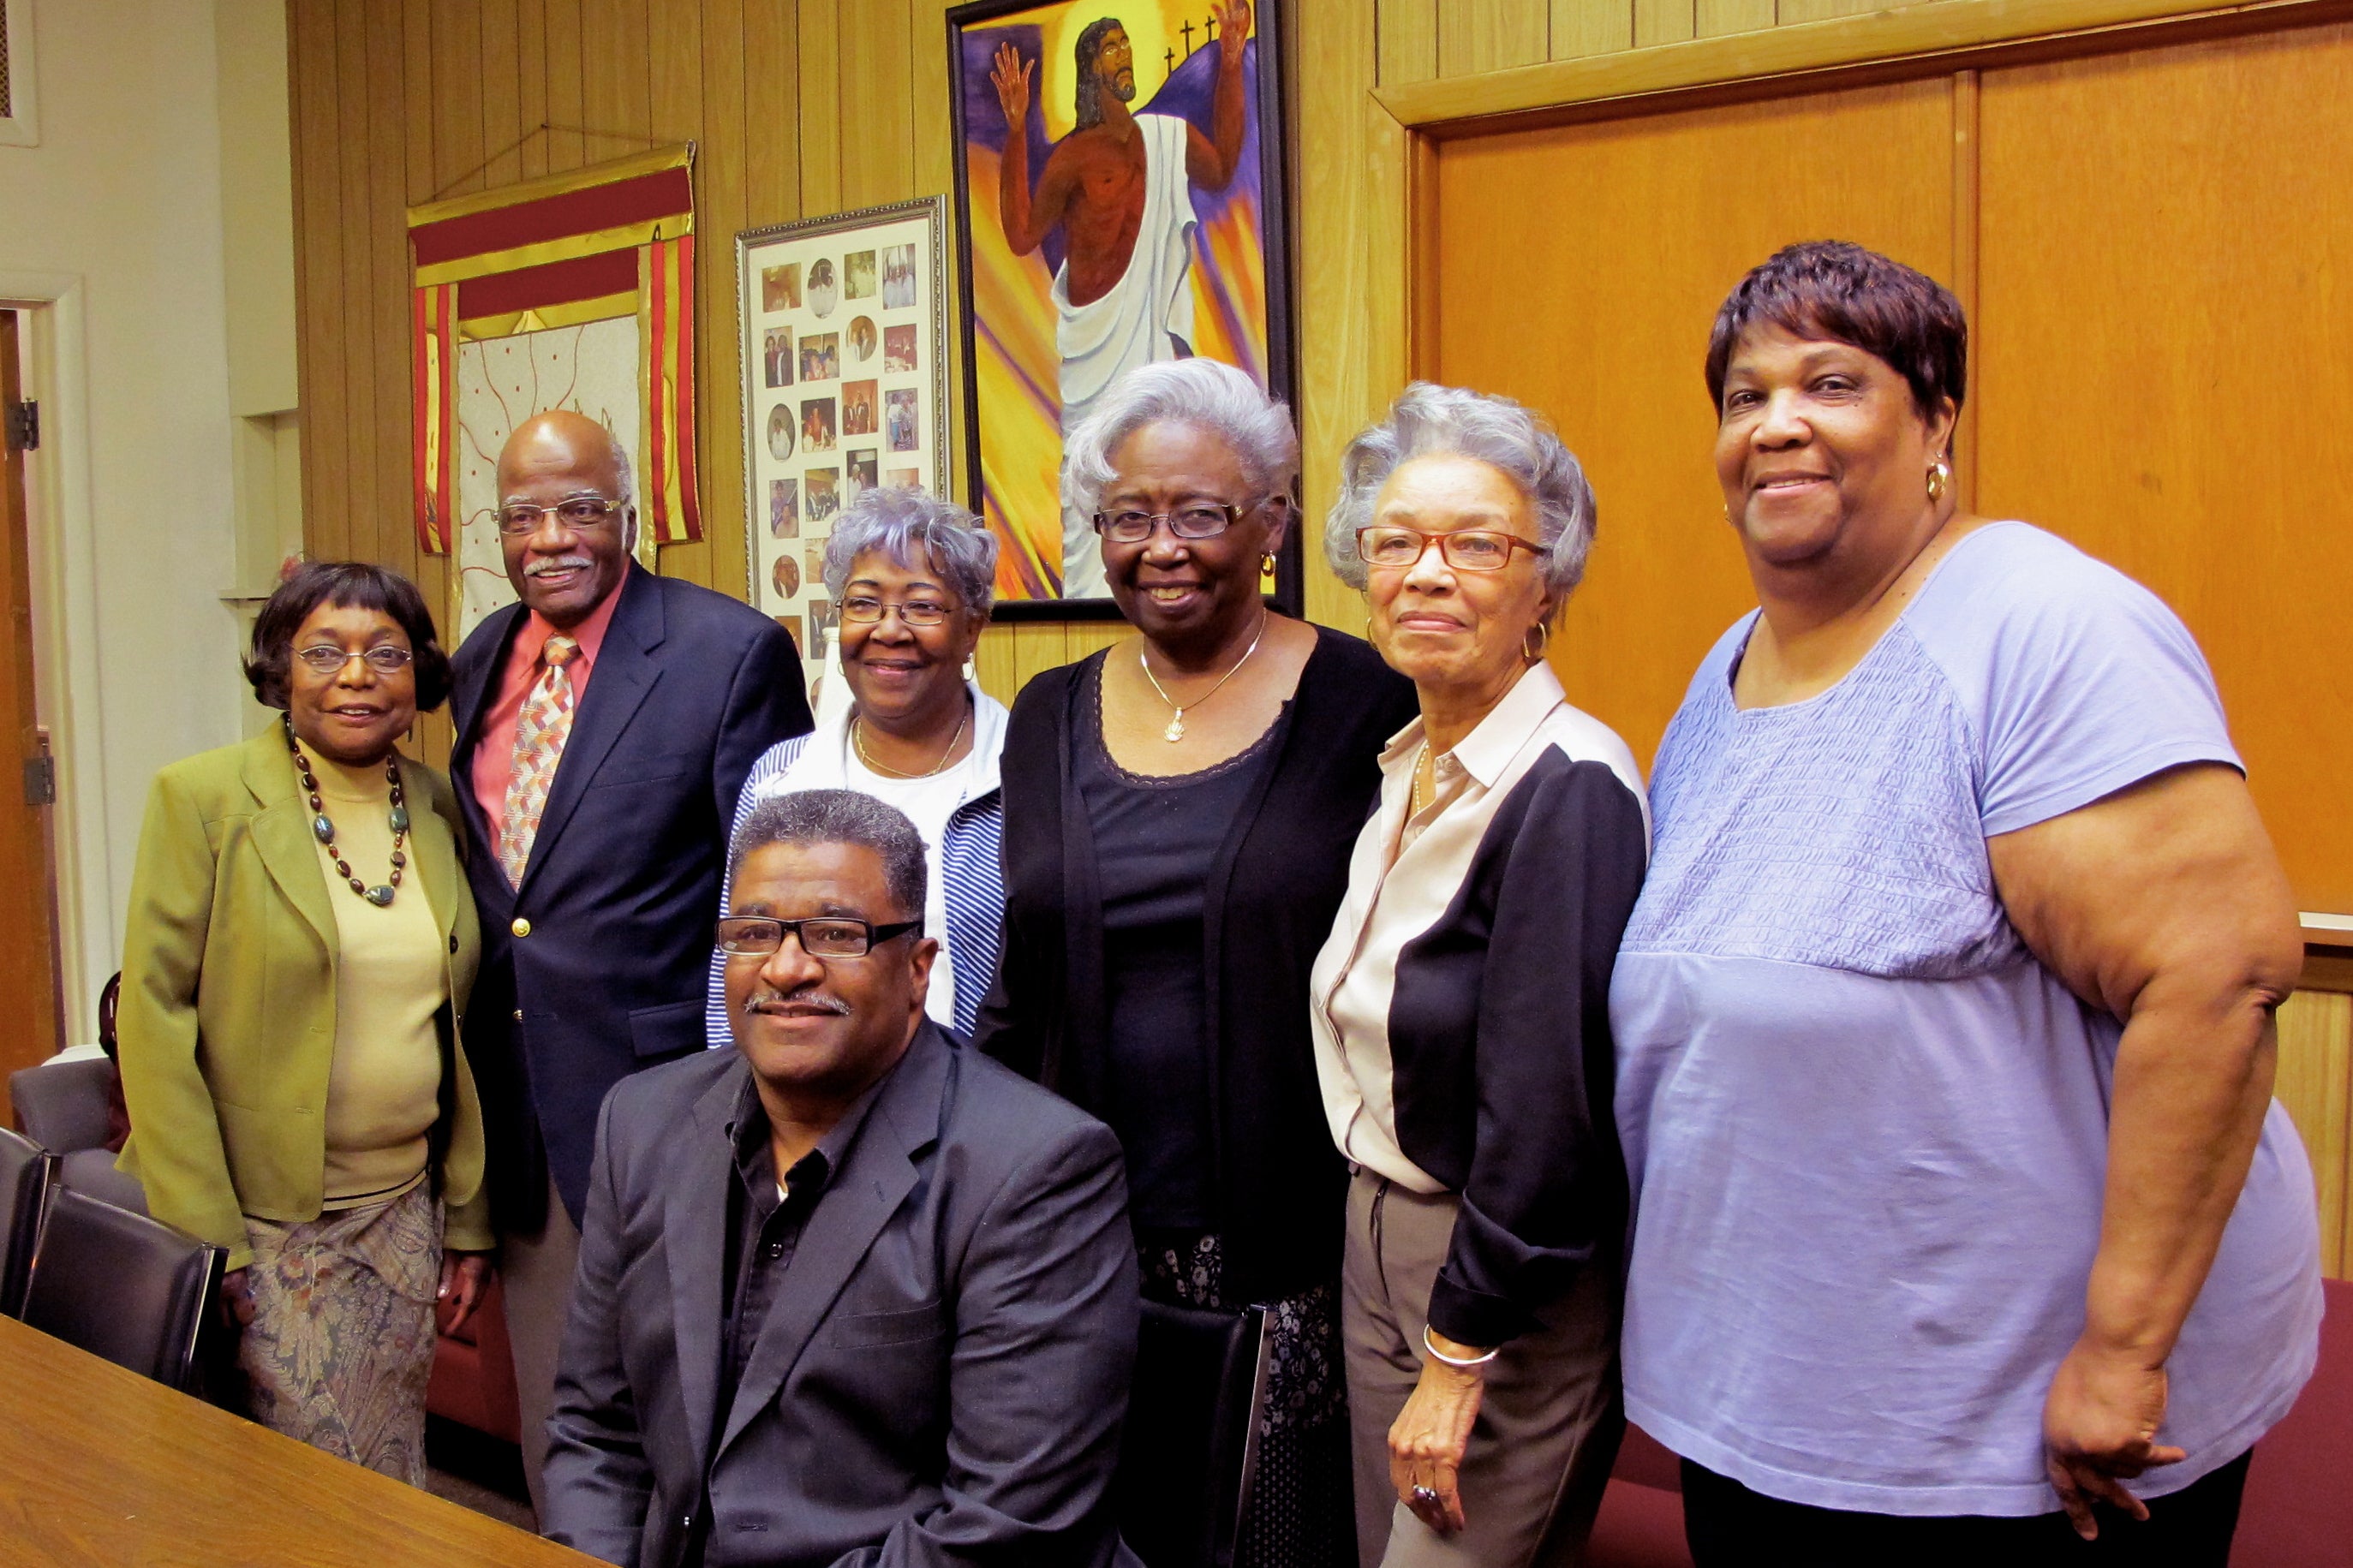 Leaders at Miller Memorial Baptist, (L to R): Norene Awkward, Ed Awkward, Rhoda Chasten, Deacon Chester Hampton (seated), Cynthia Fisher, Joyce Neal, and Dawn Duppins